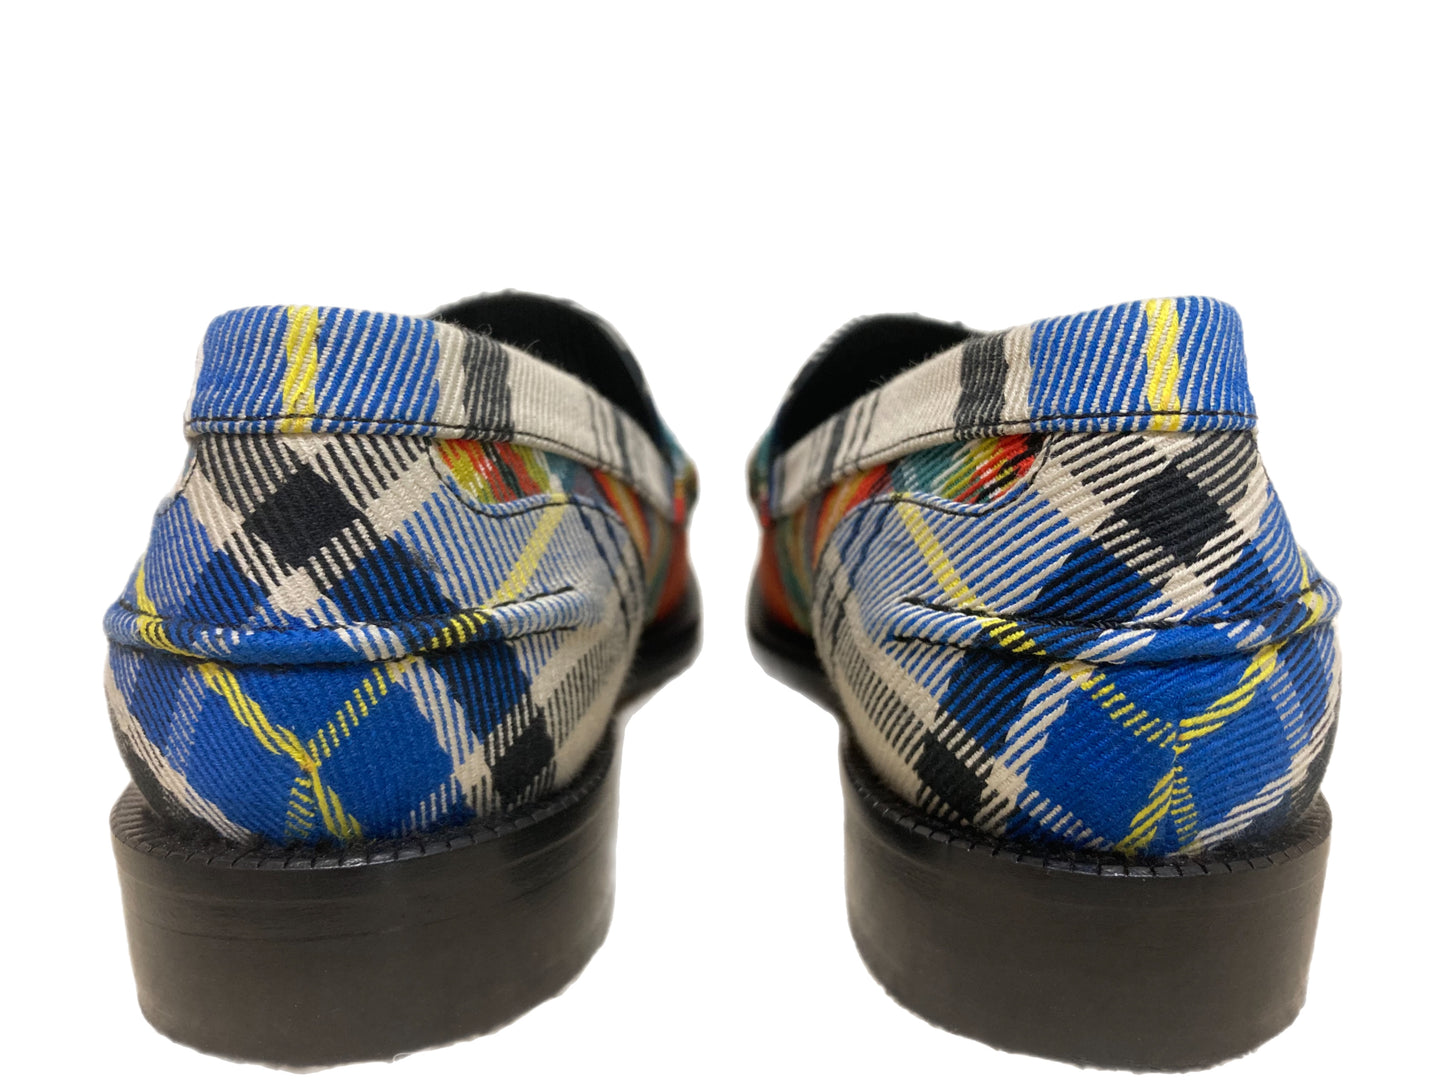 BURBERRY Plaid Loafers Multi-Color Size 38.5